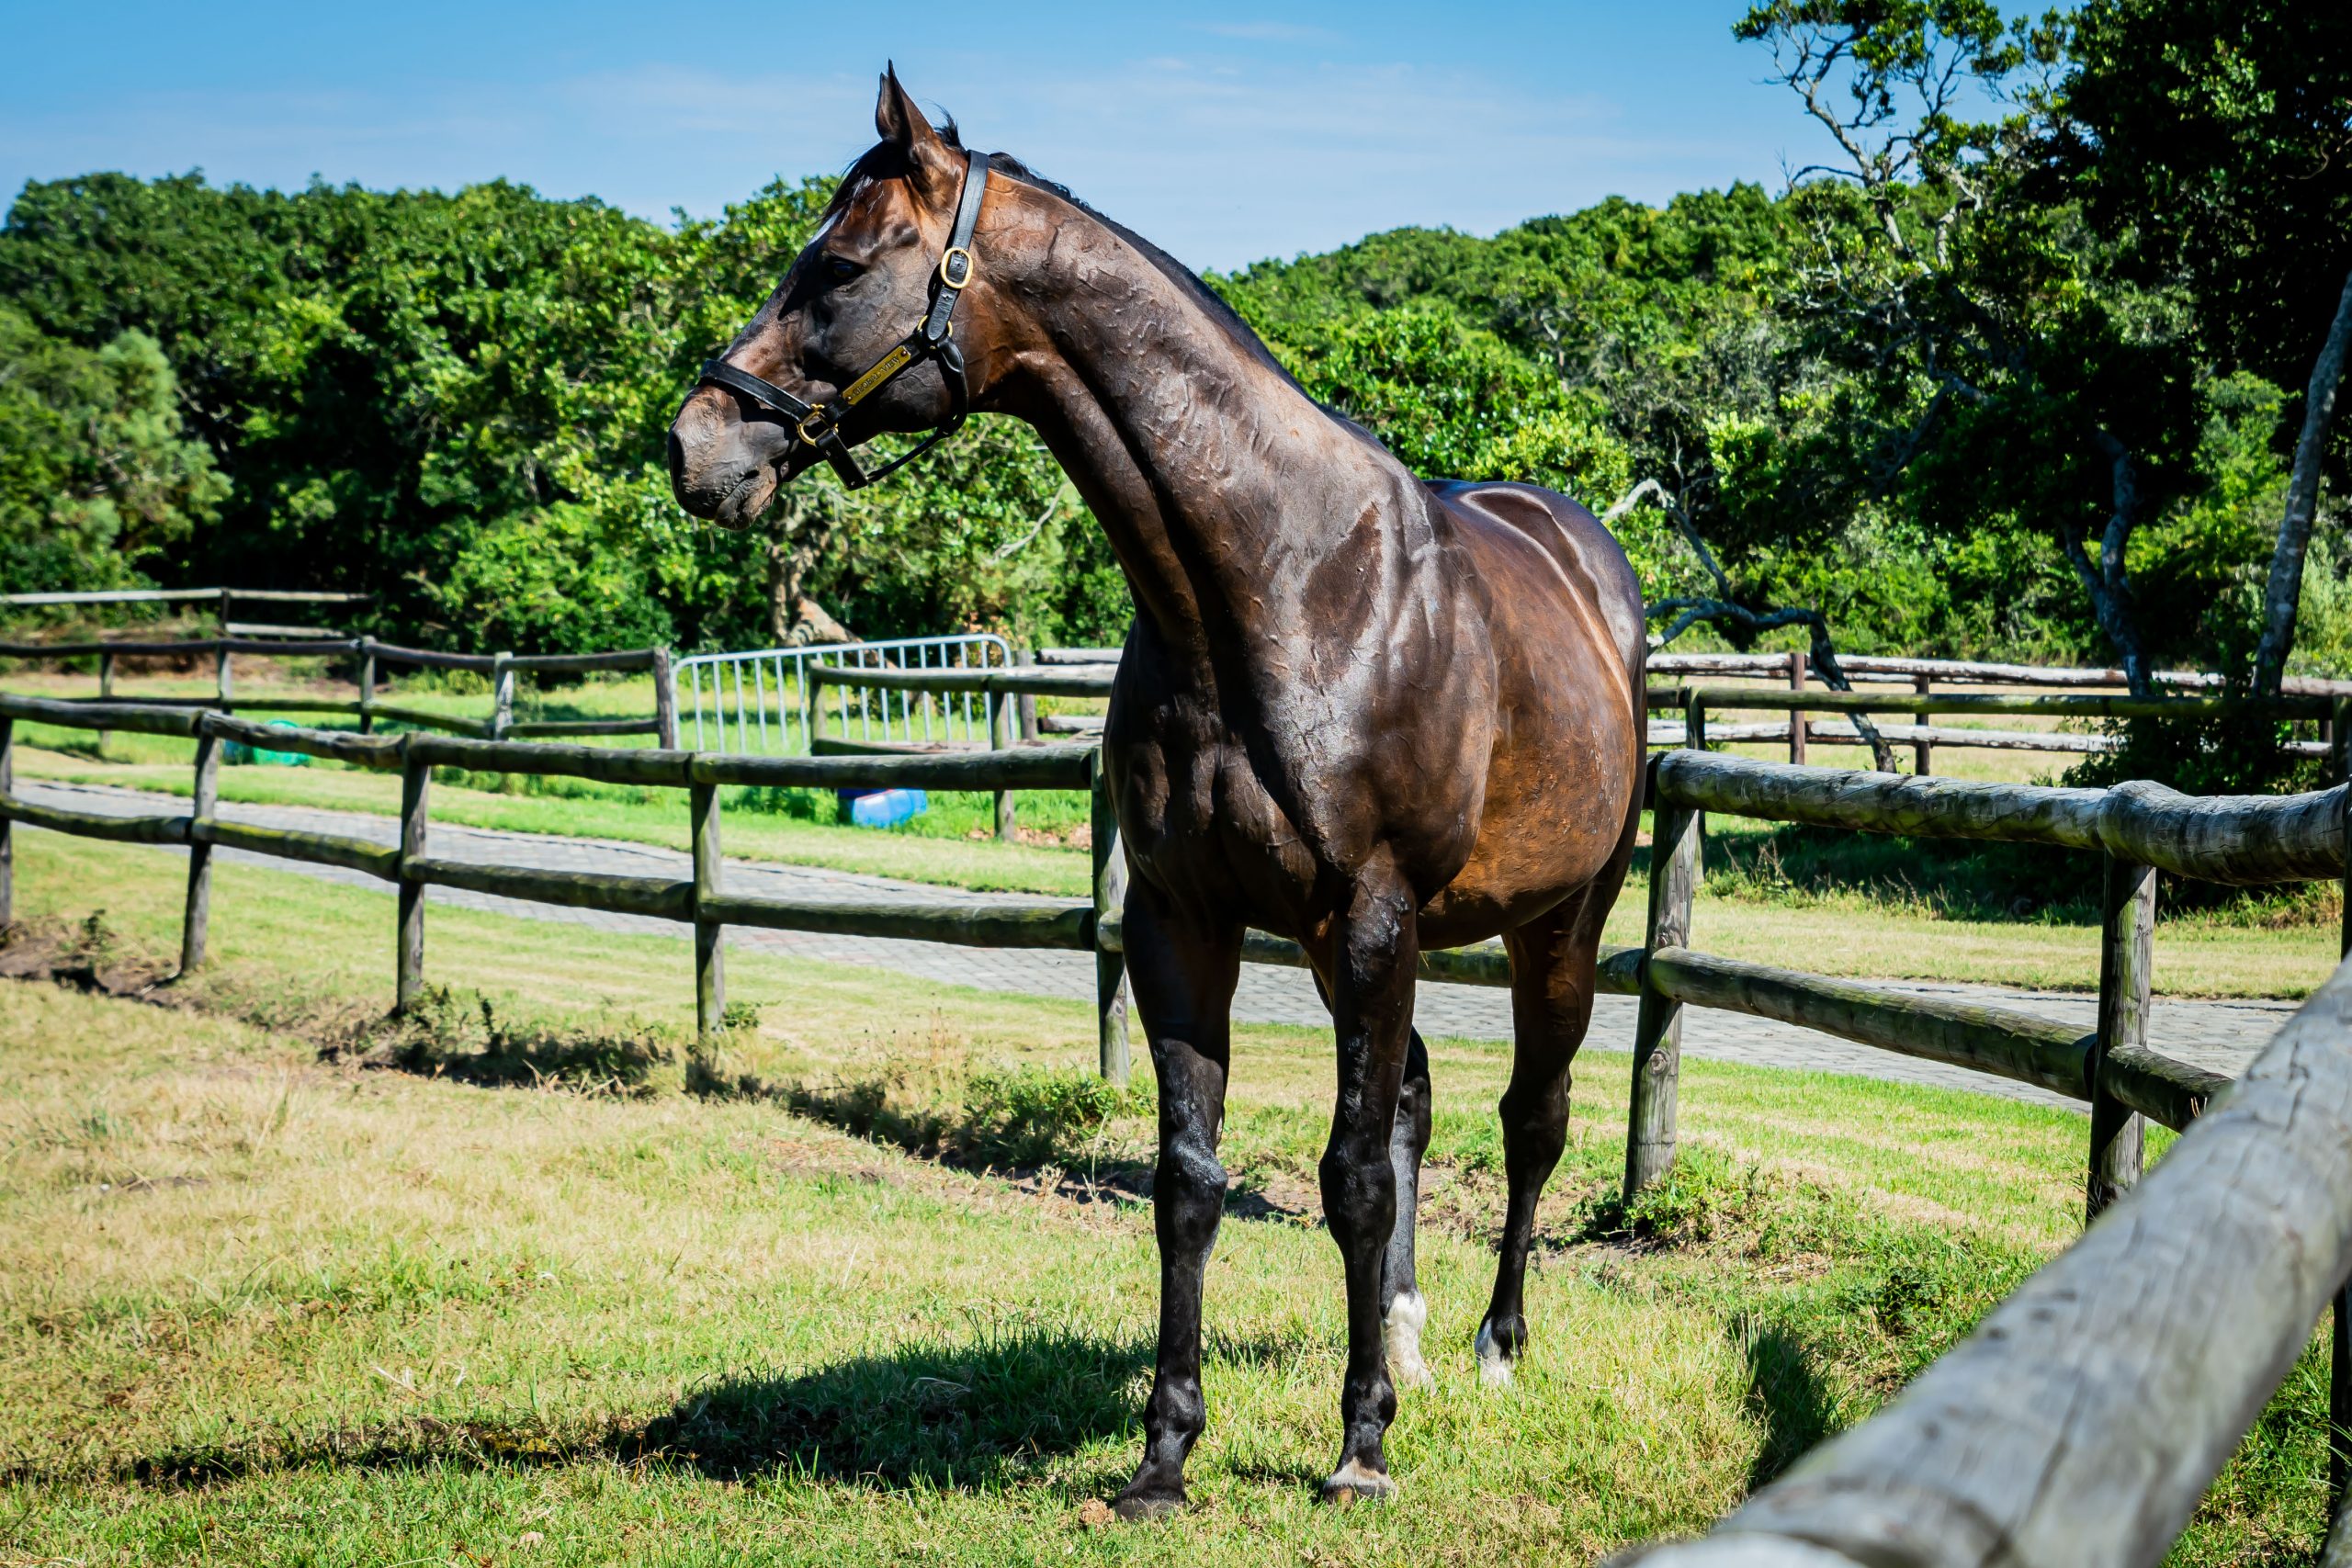 Global View – a son of Galileo out of Egyptian Queen by Storm Cat